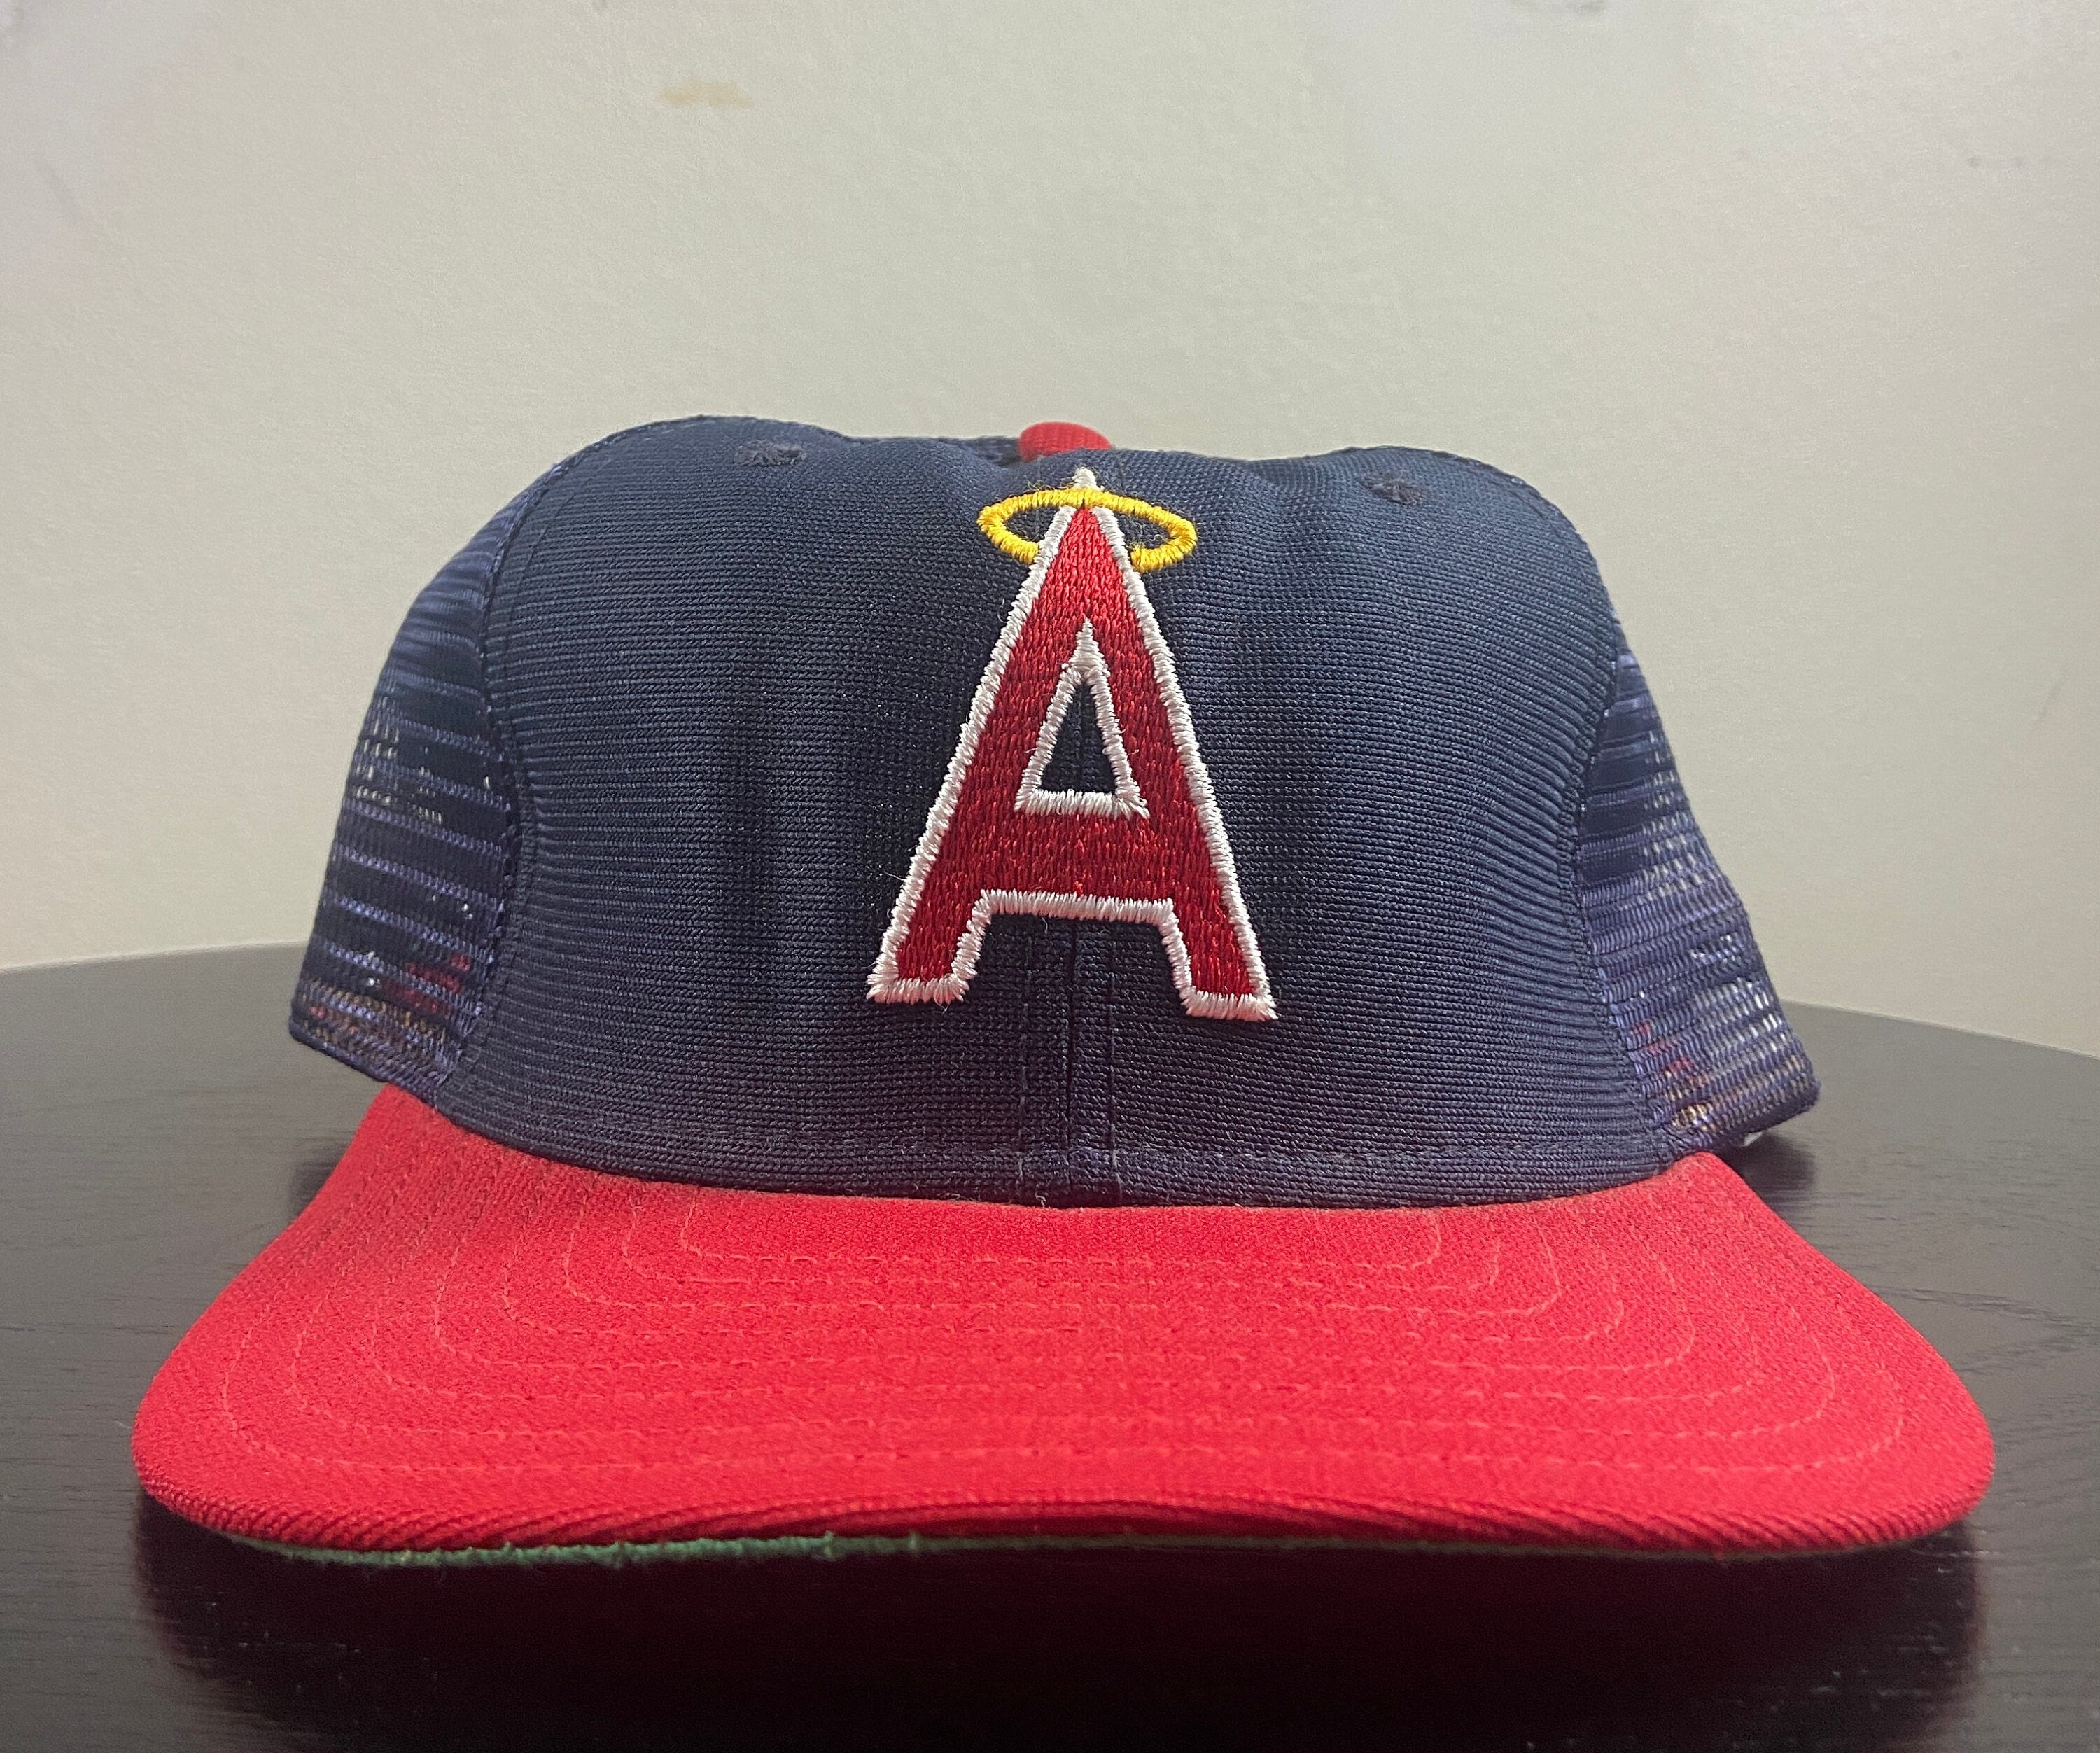 New Era Anaheim Angels Legacy Throwback 59Fifty Hat Cap Size 7 3/4 RARE